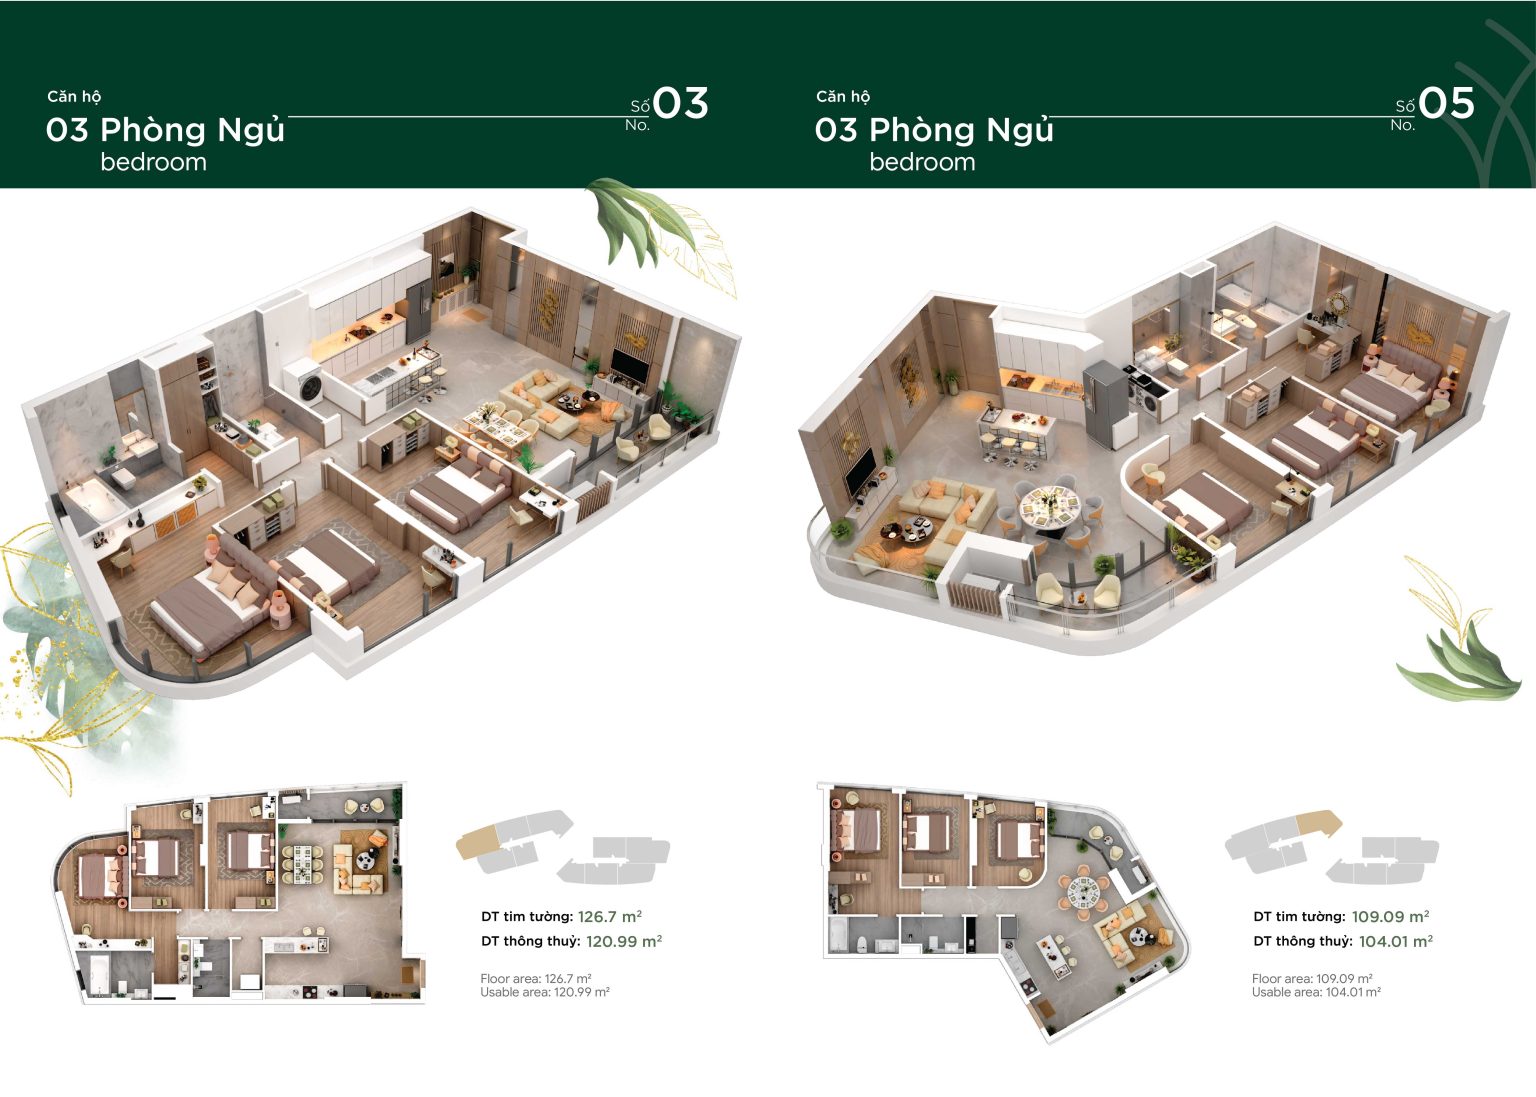 3-bedroom apartment layout of Thao Dien Green